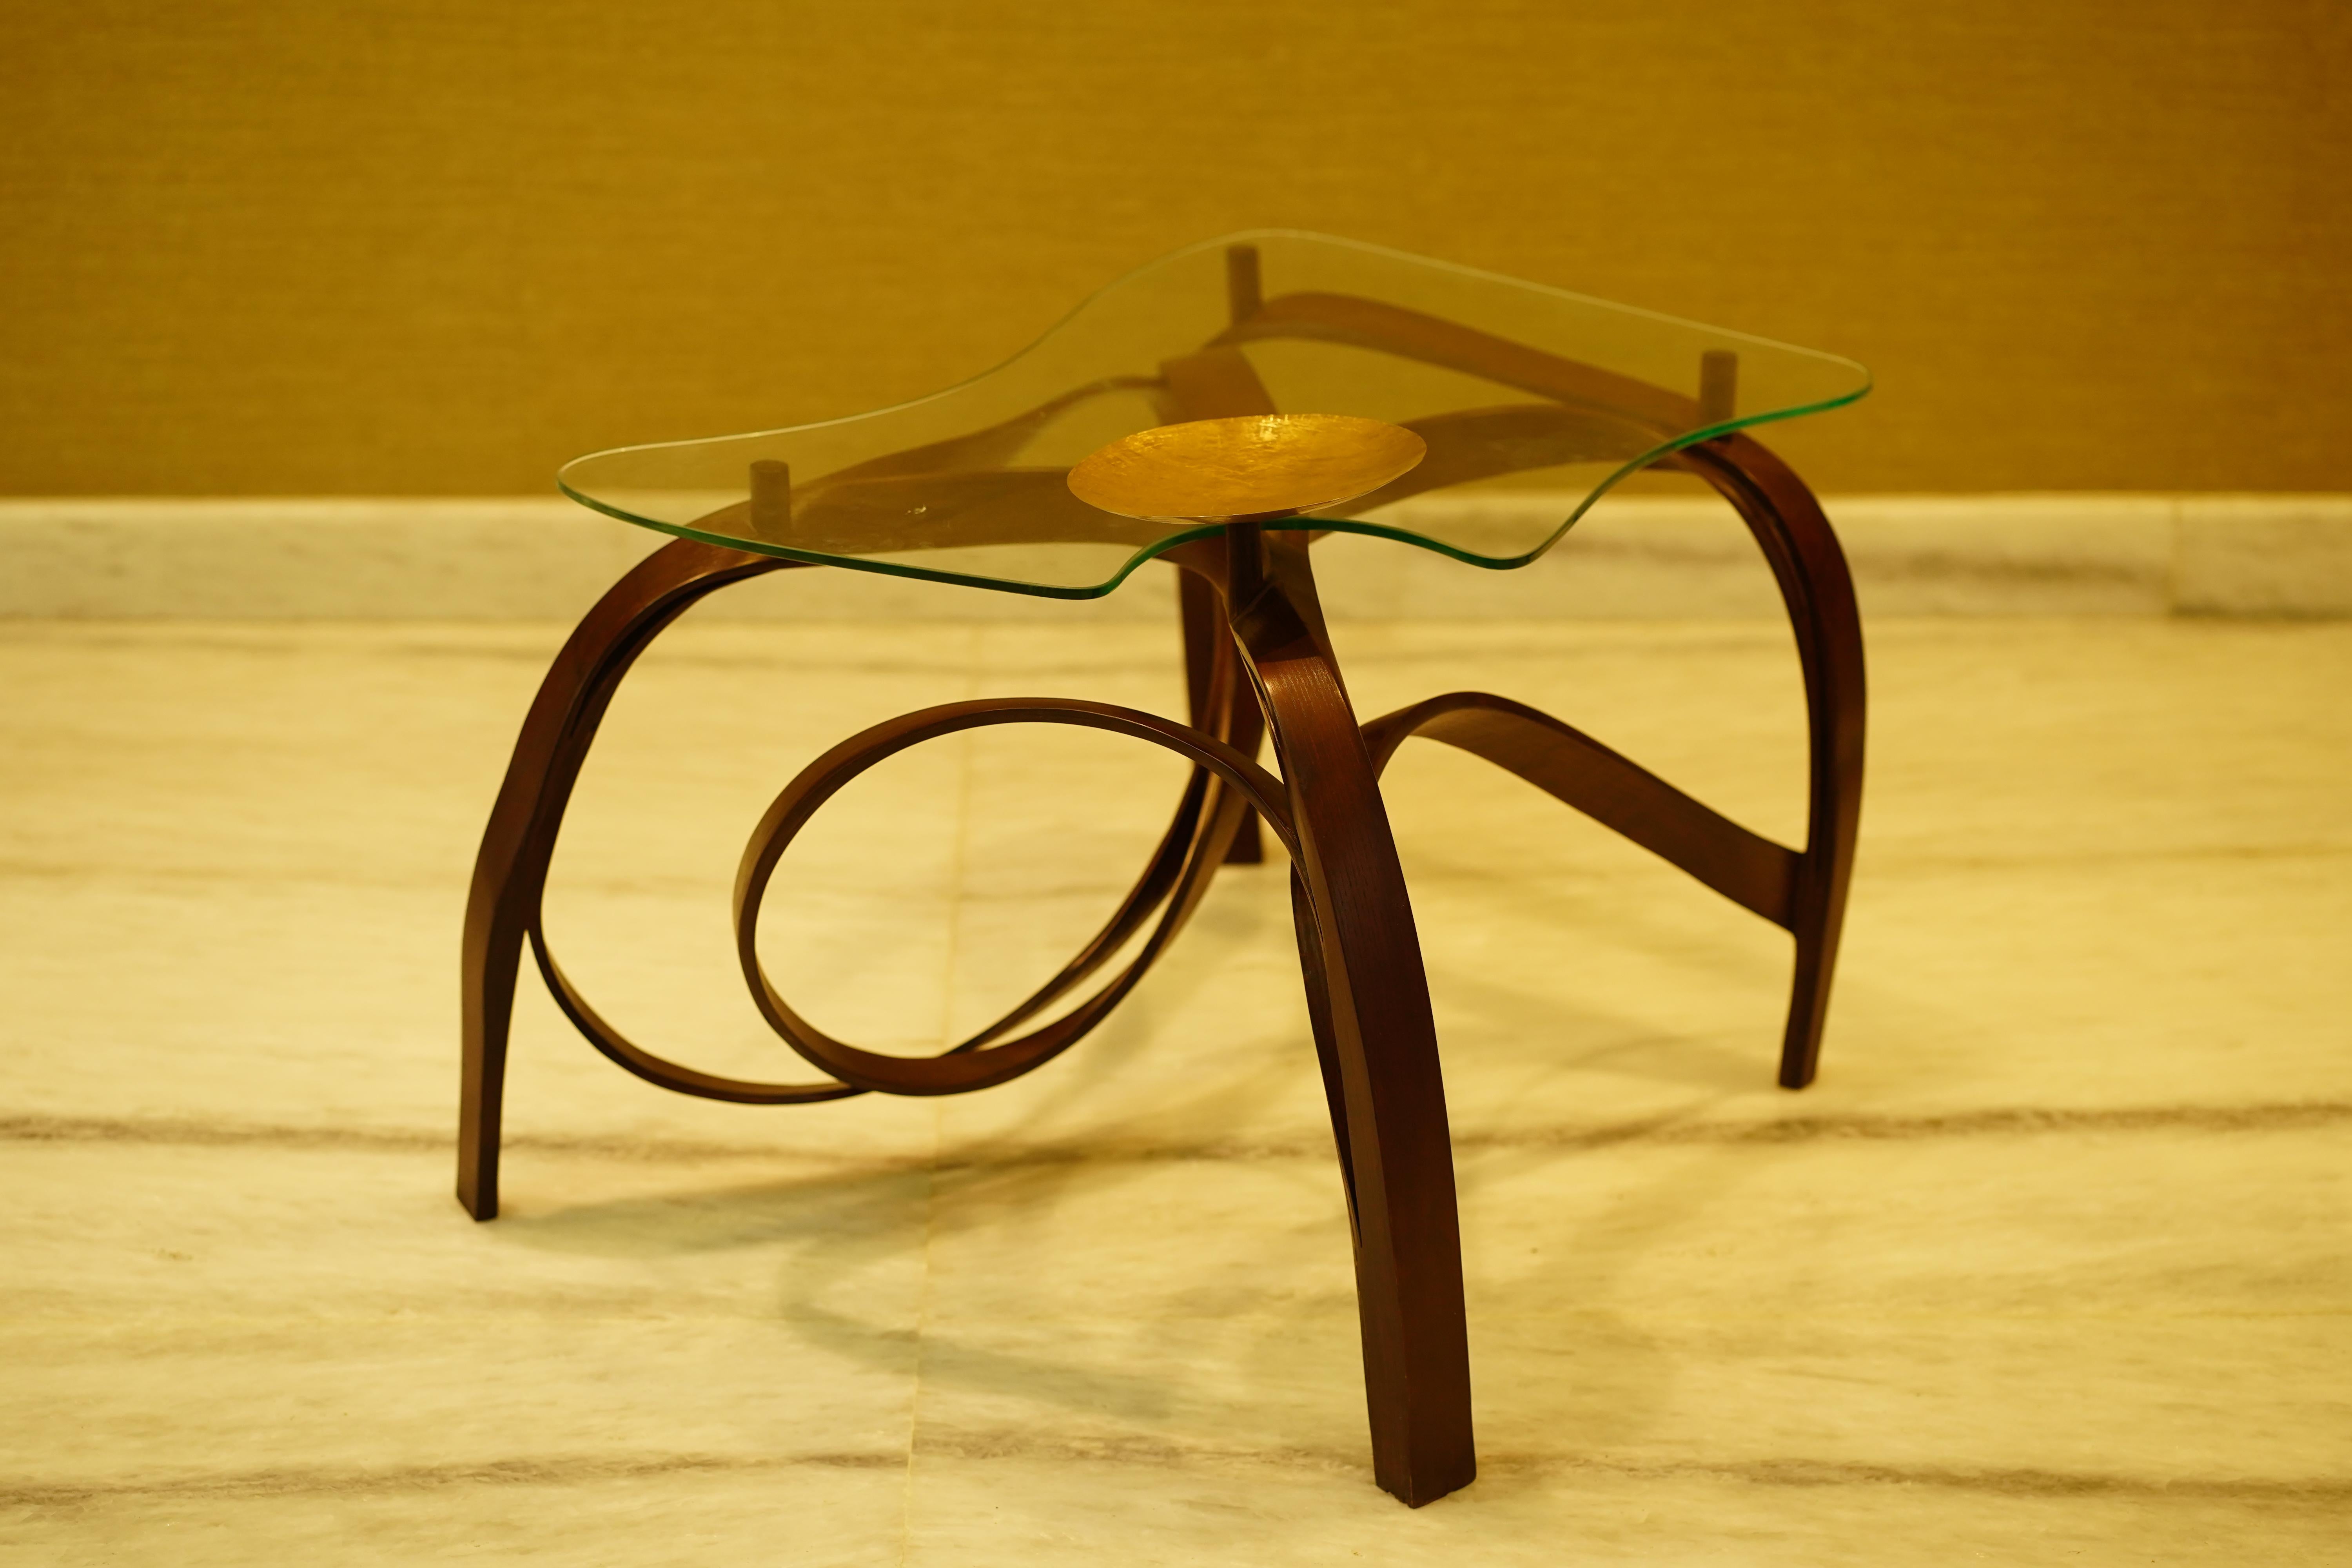 Side table I by Raka Studio
Dimensions: D 81 x W 63.5 x H 50.5 cm
Material: ash wood, glass, brass

This table is a compact and detailed piece, making each of its viewing angles visually precious. An elevated brass plate has been infused to